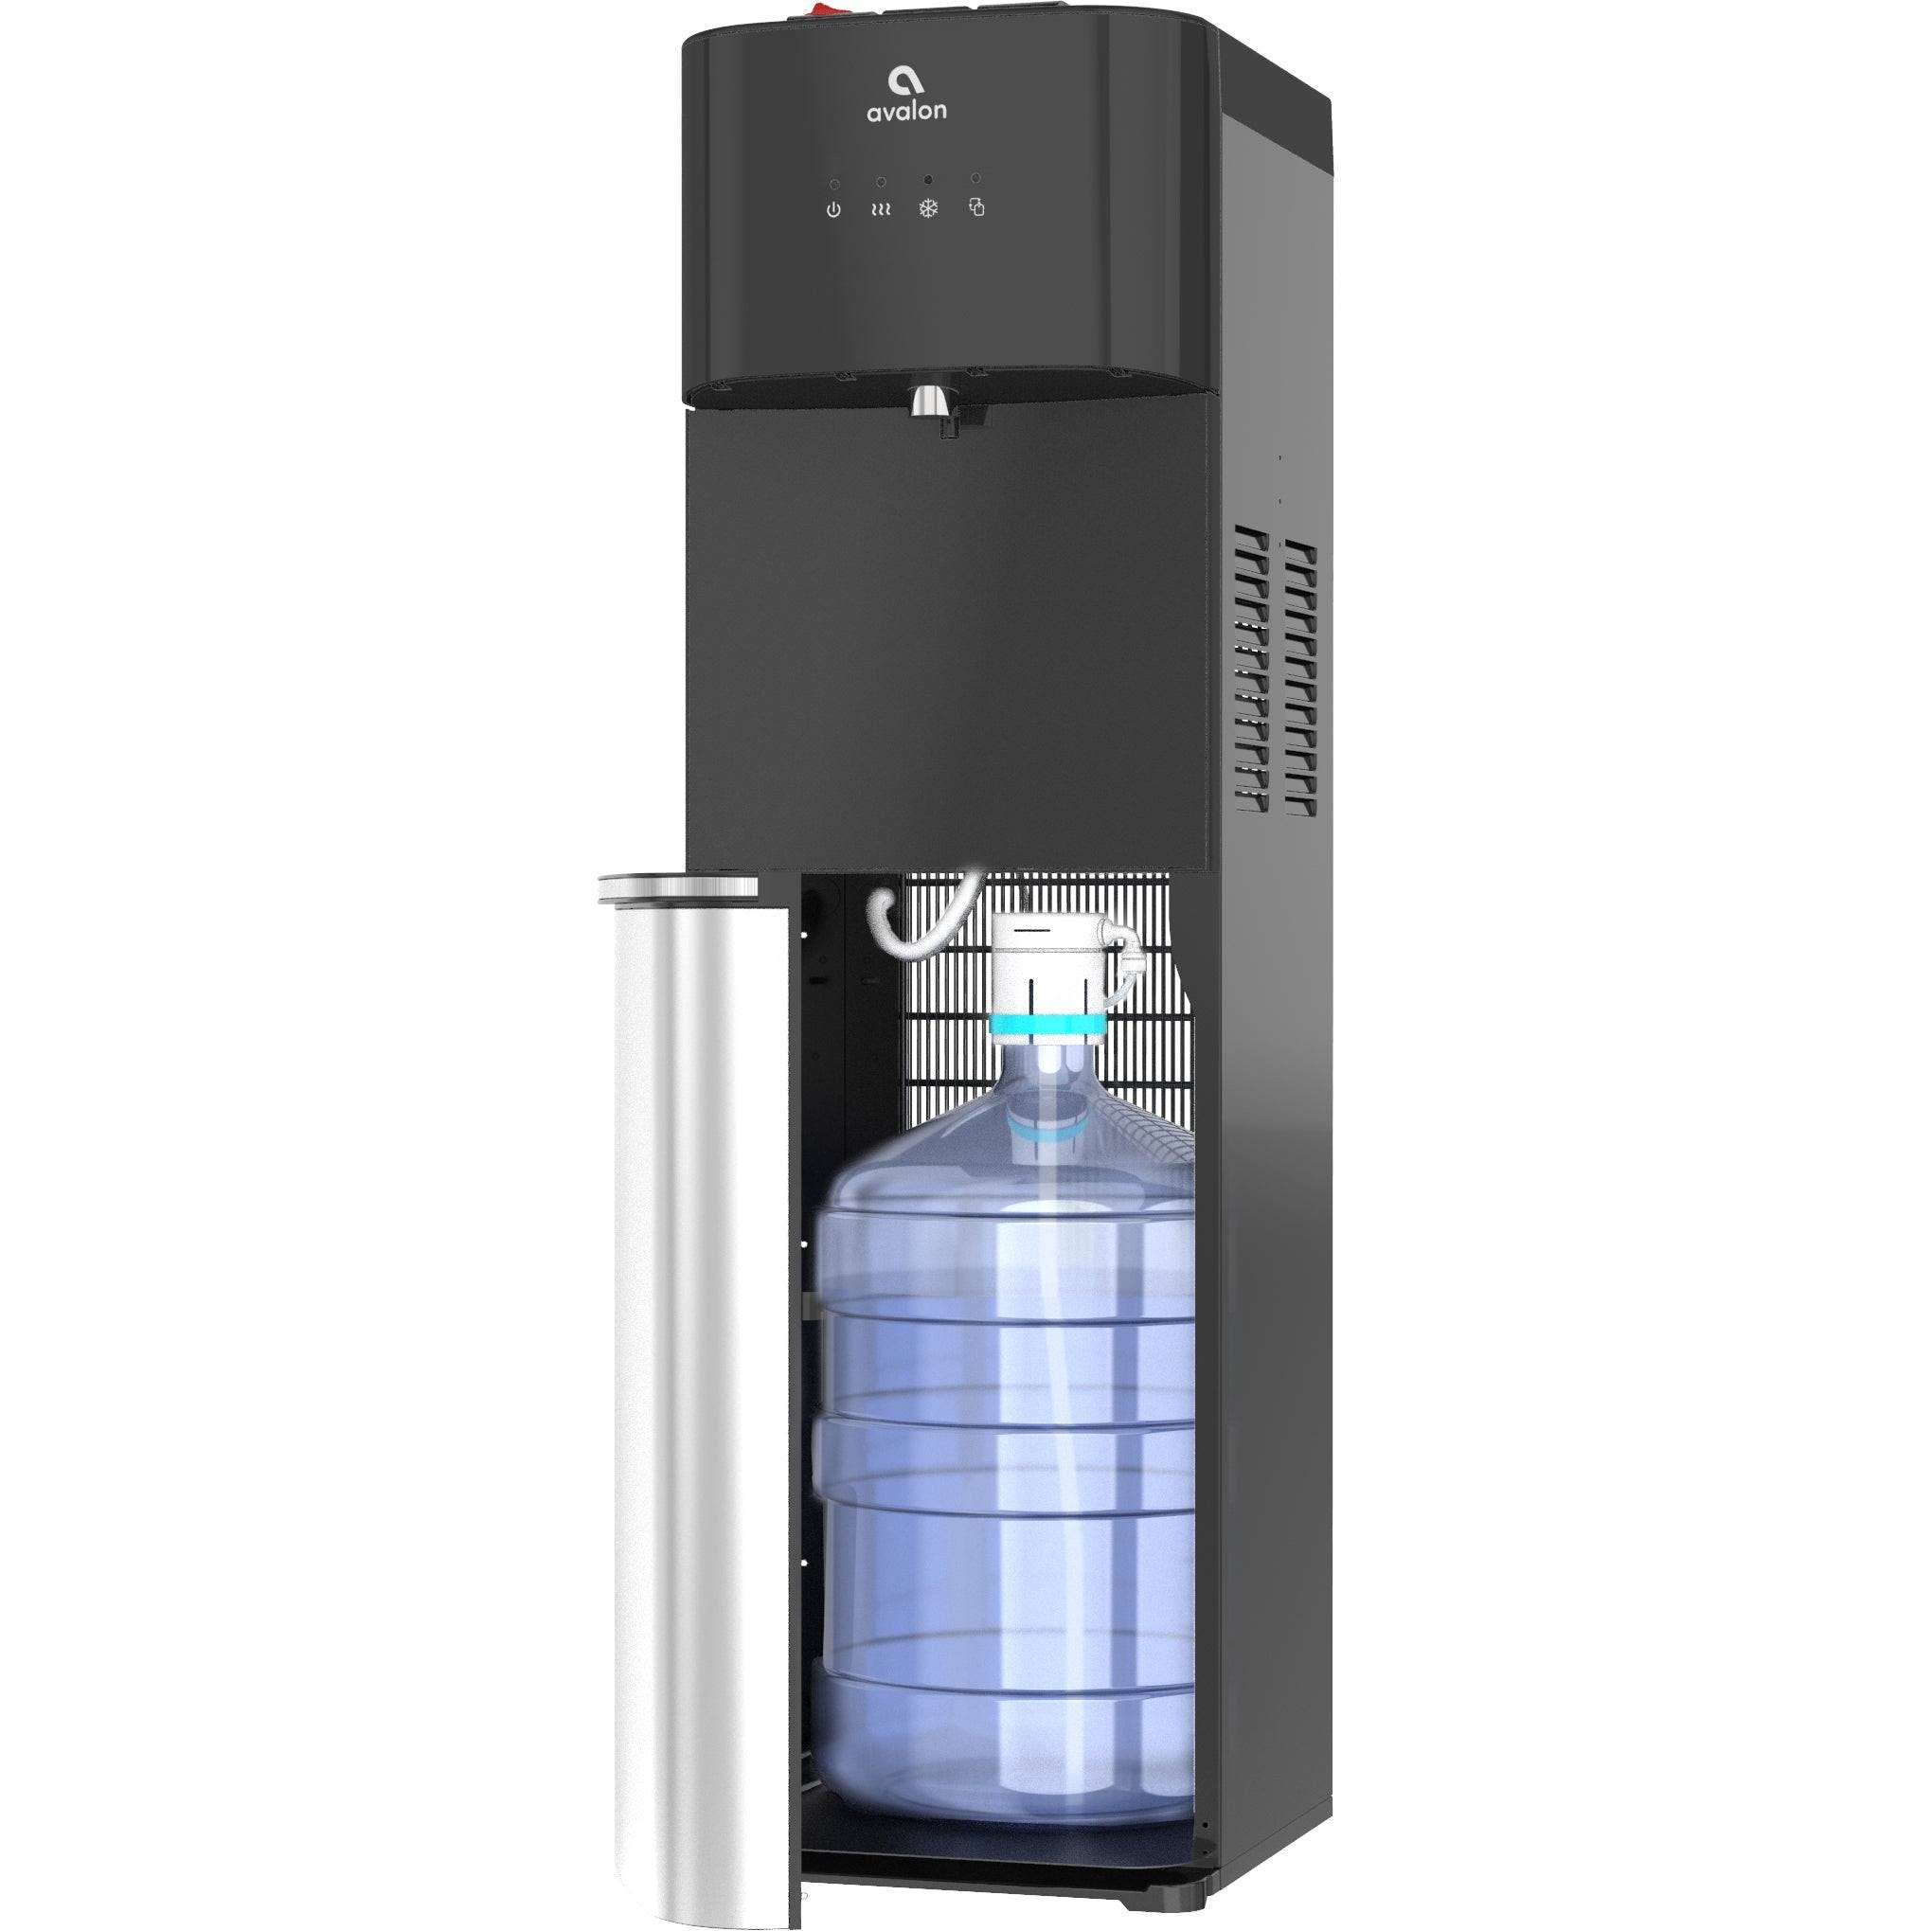 Avalon Bottle-less Water Dispenser with BioGuard & 3 Temperature Settings | Image